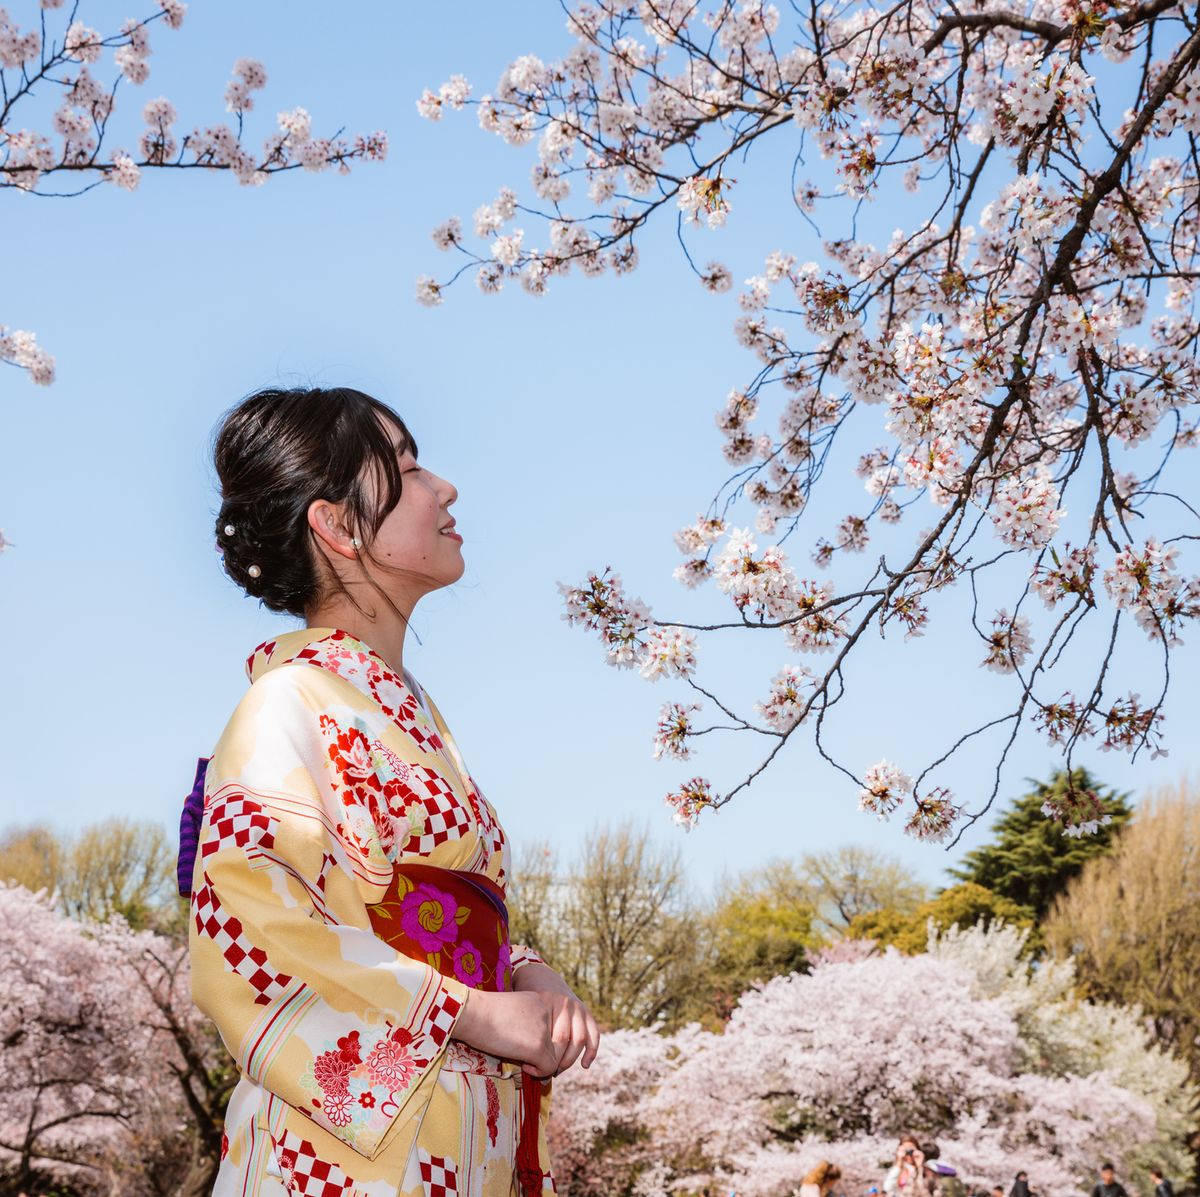 japanese girl with traditional kimono in a public park during cherry blossom season, tokyo, japan